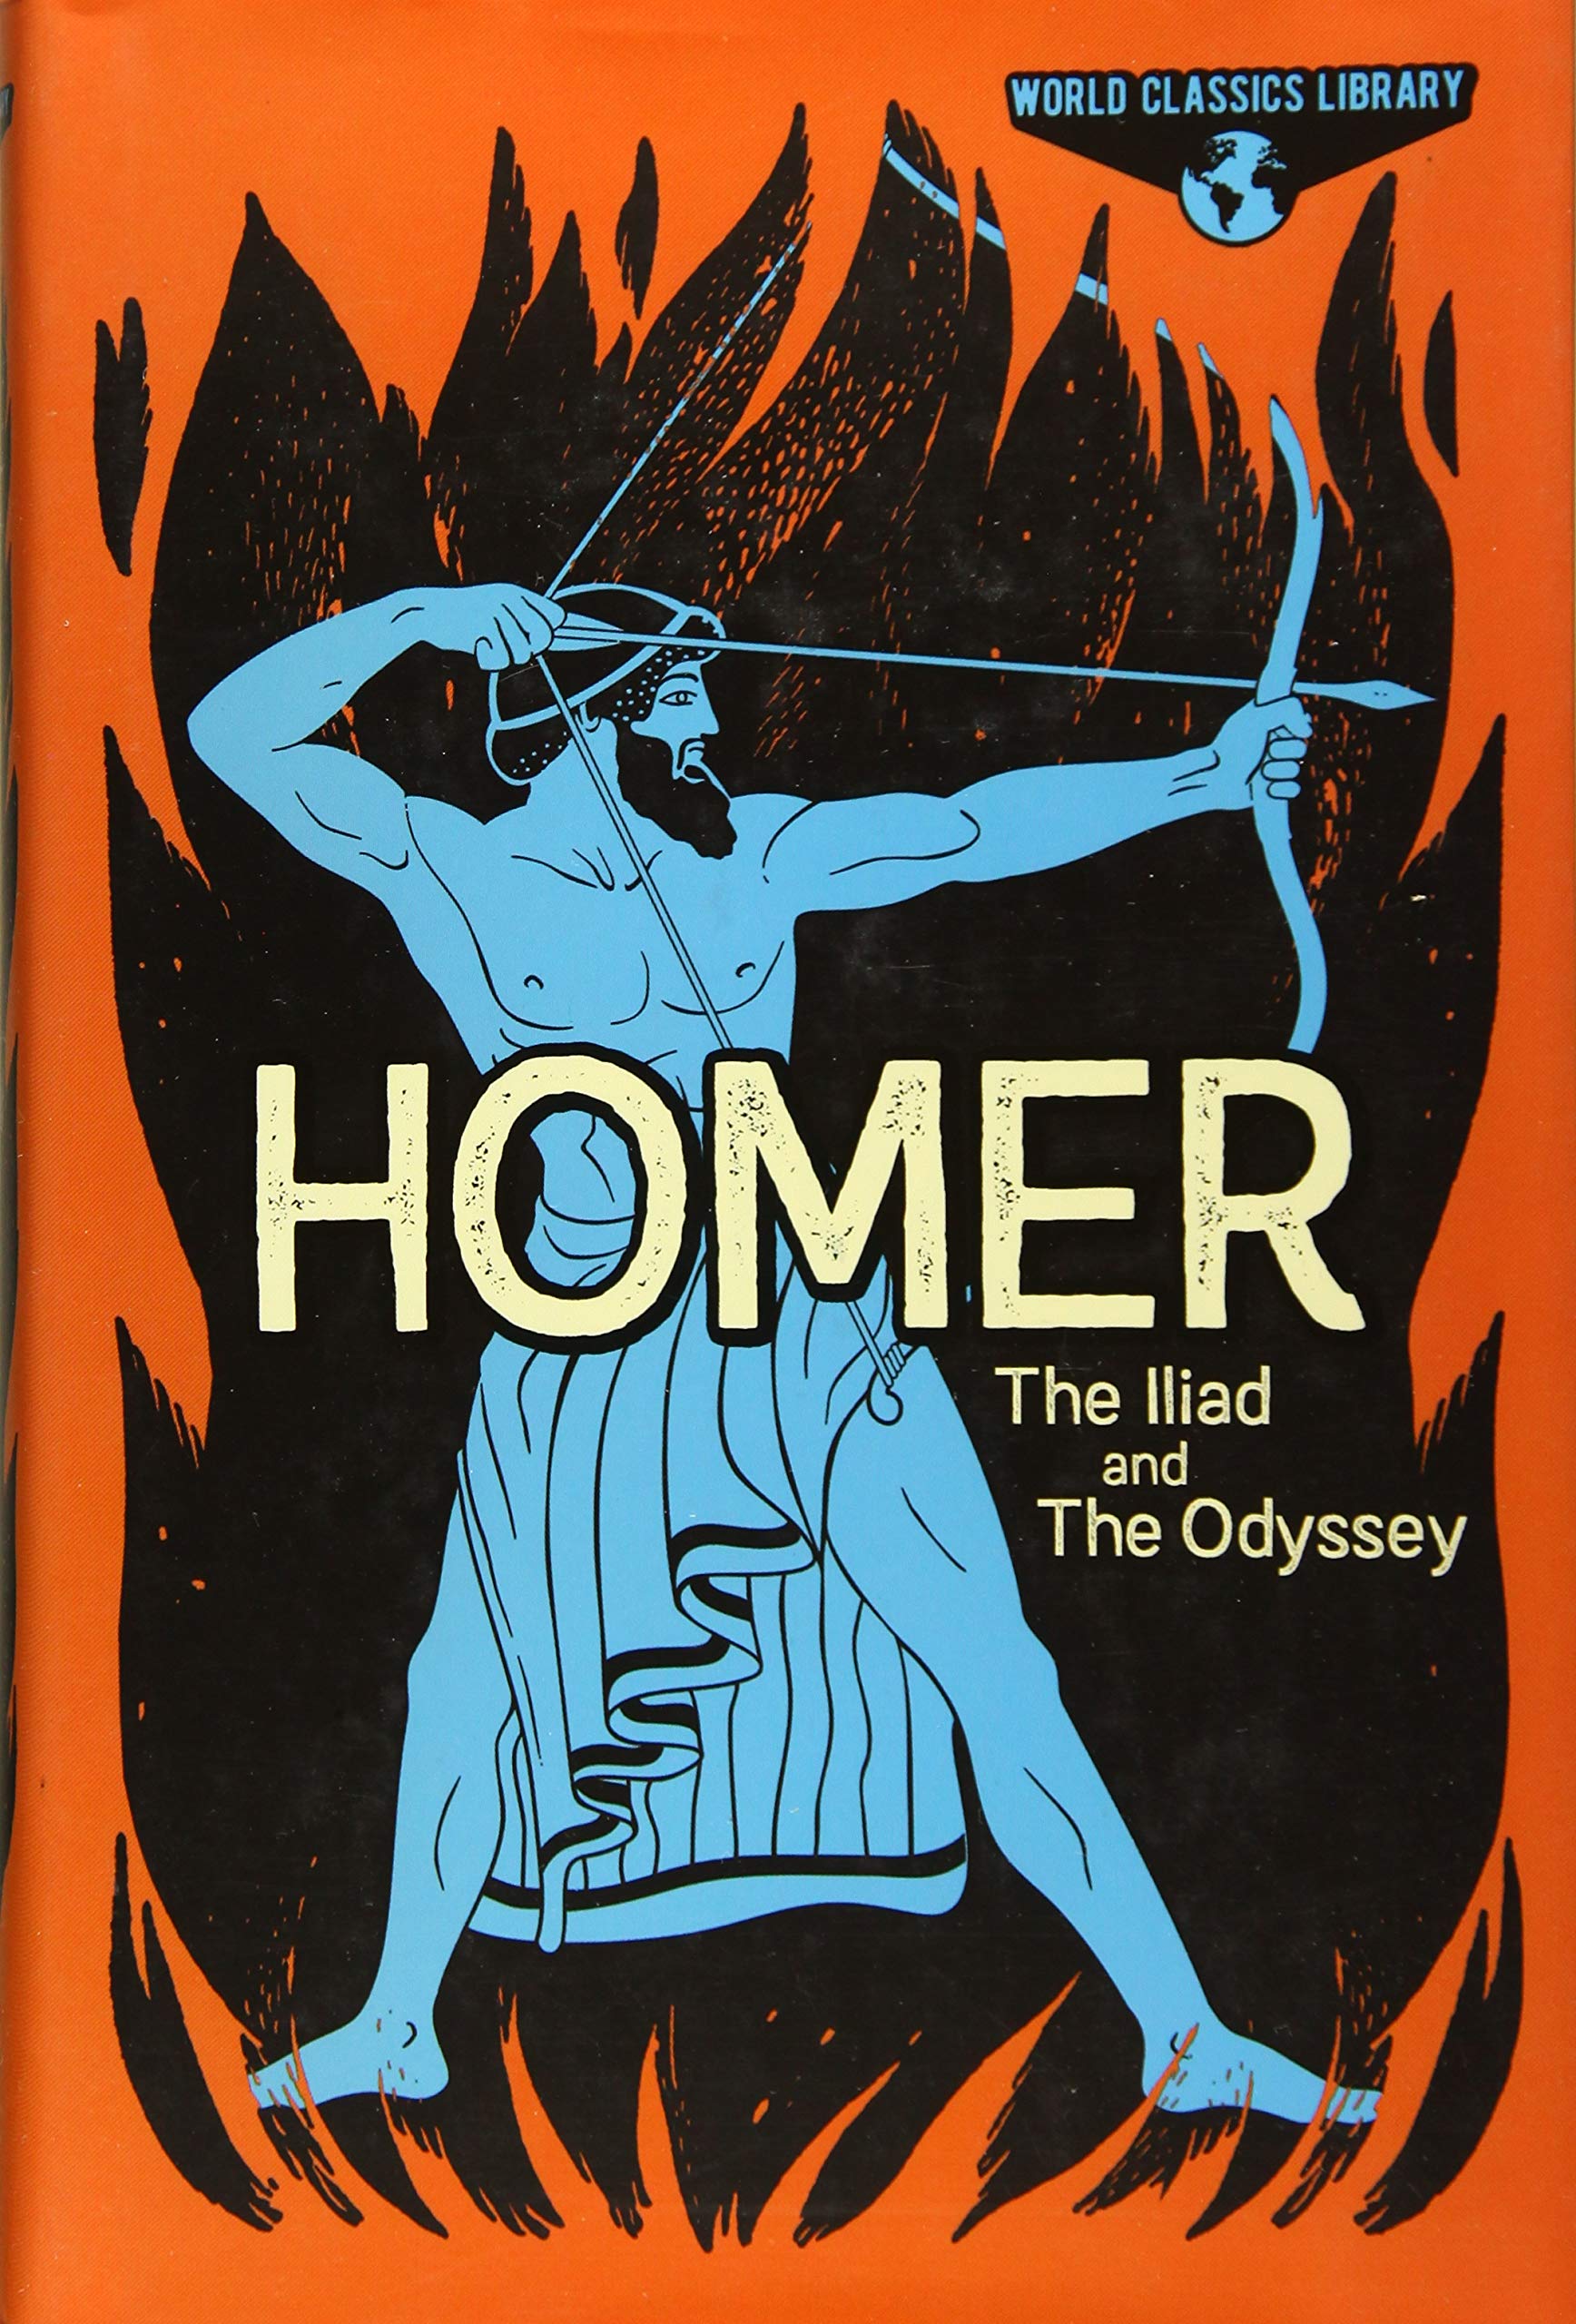 World Classics Library: Homer: The Illiad and The Odyssey | Homer